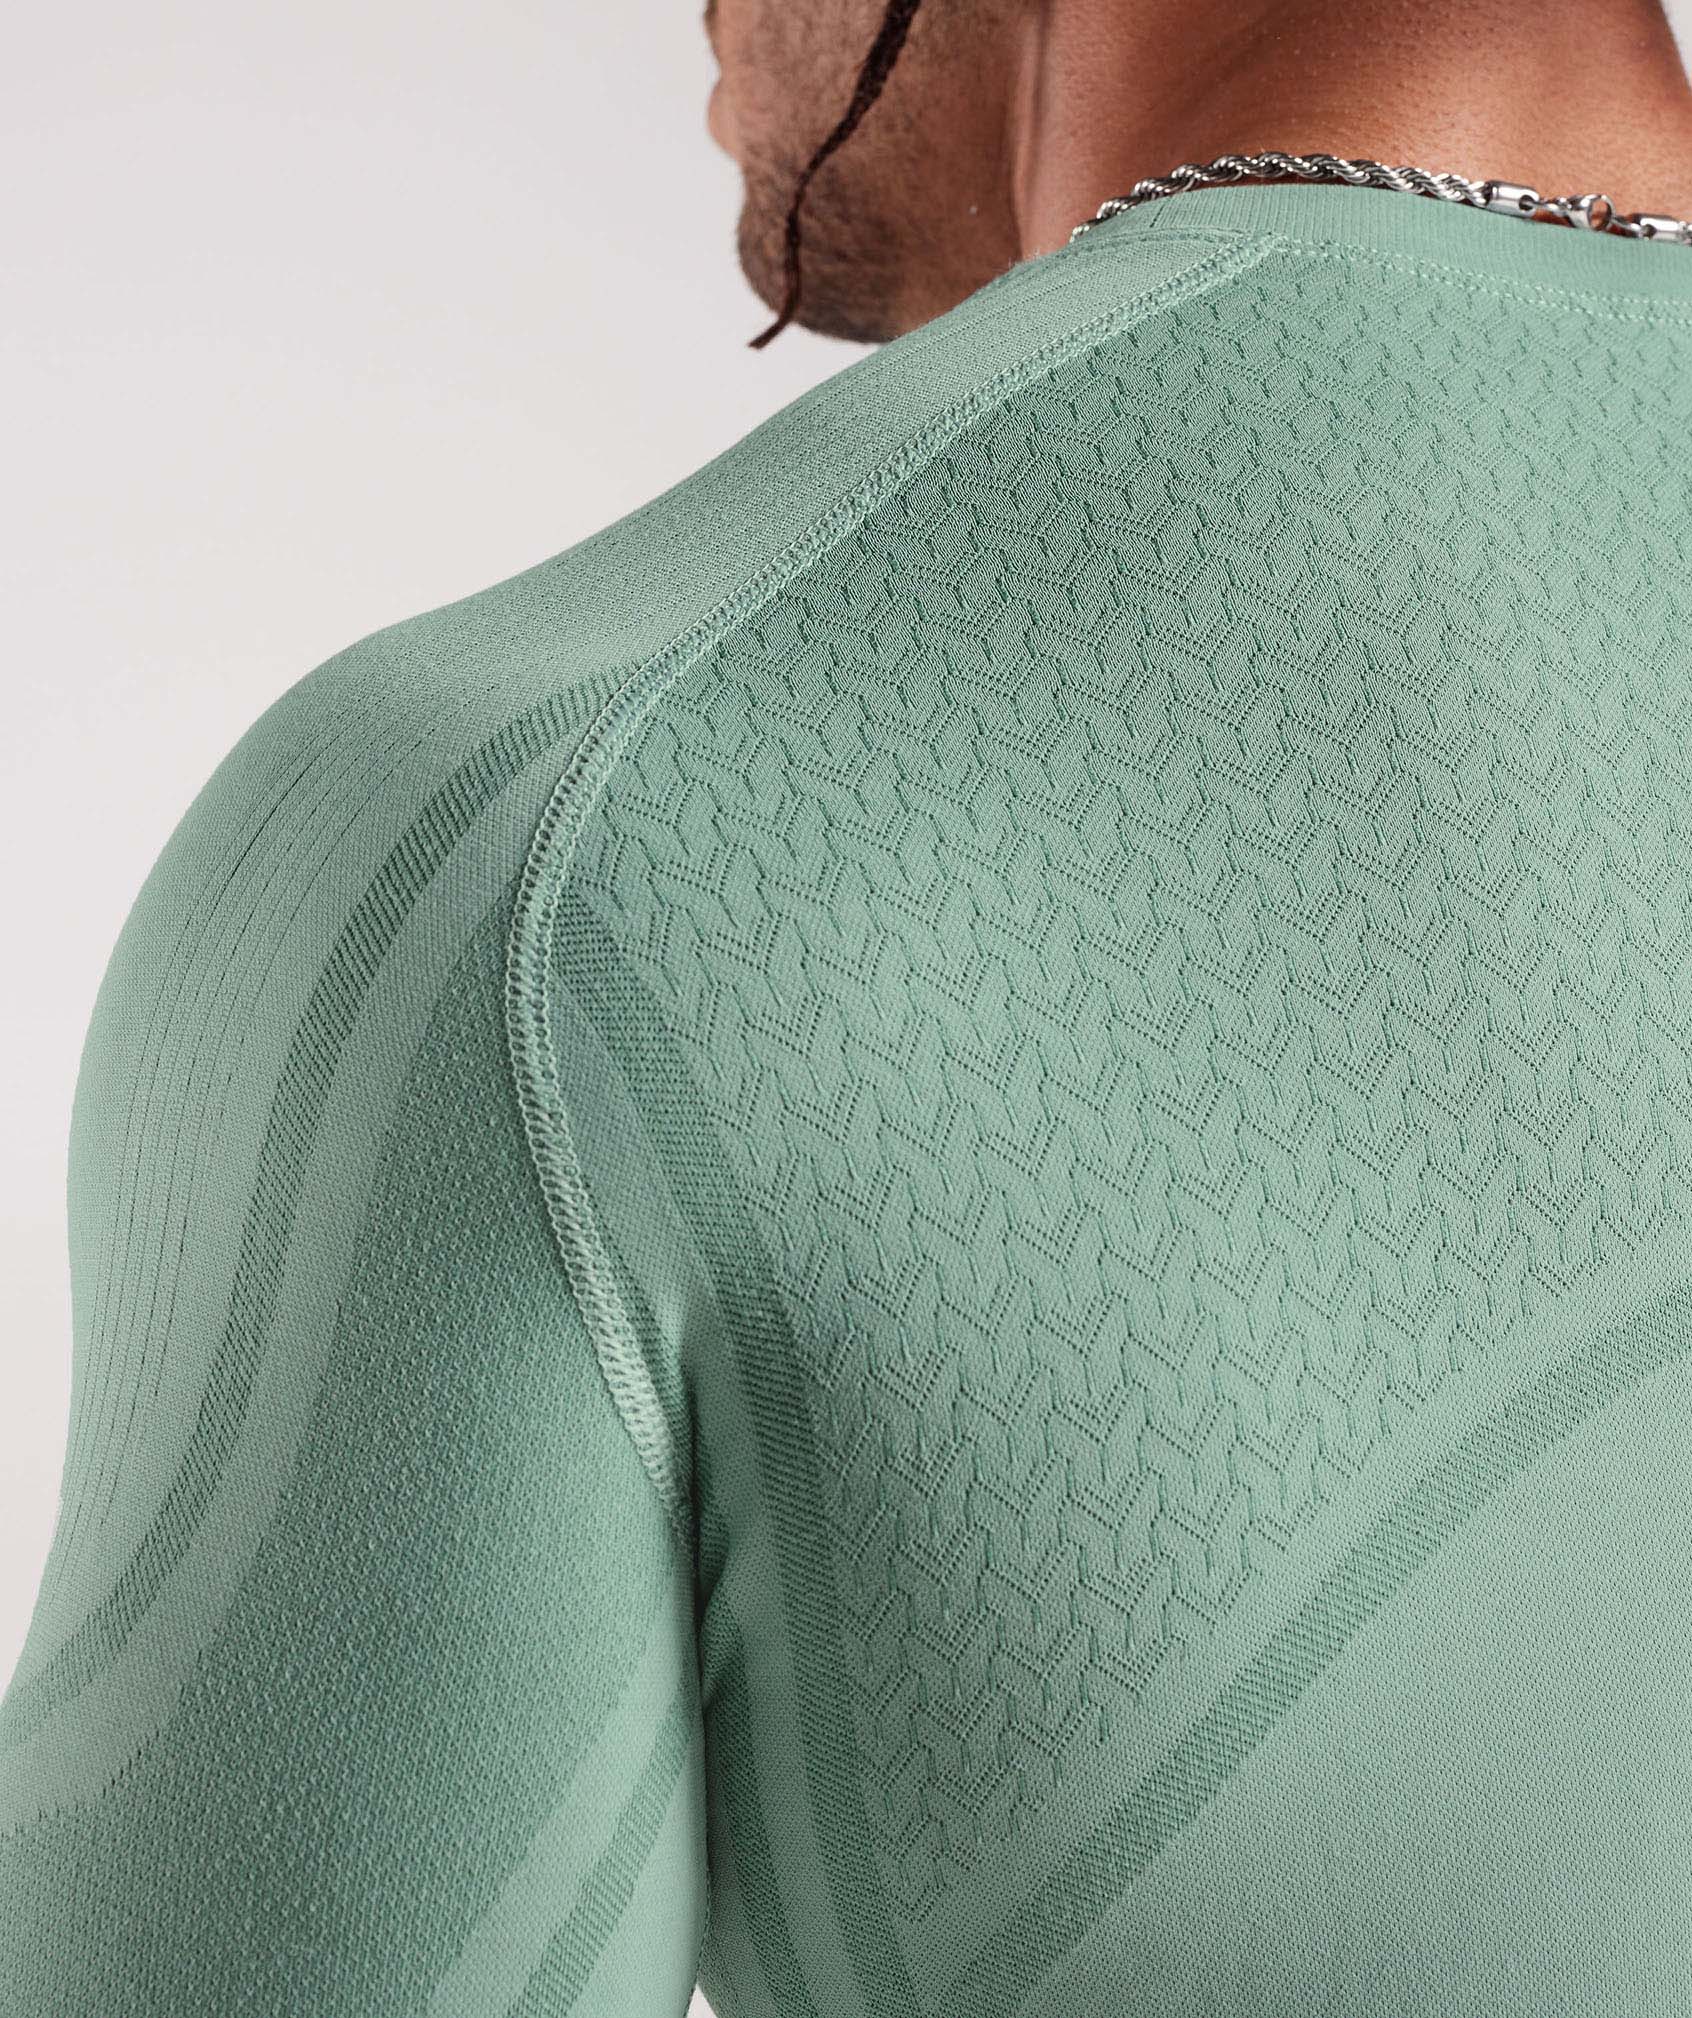 315 Seamless Long Sleeve T-Shirt in Frost Teal/Ink Teal - view 5